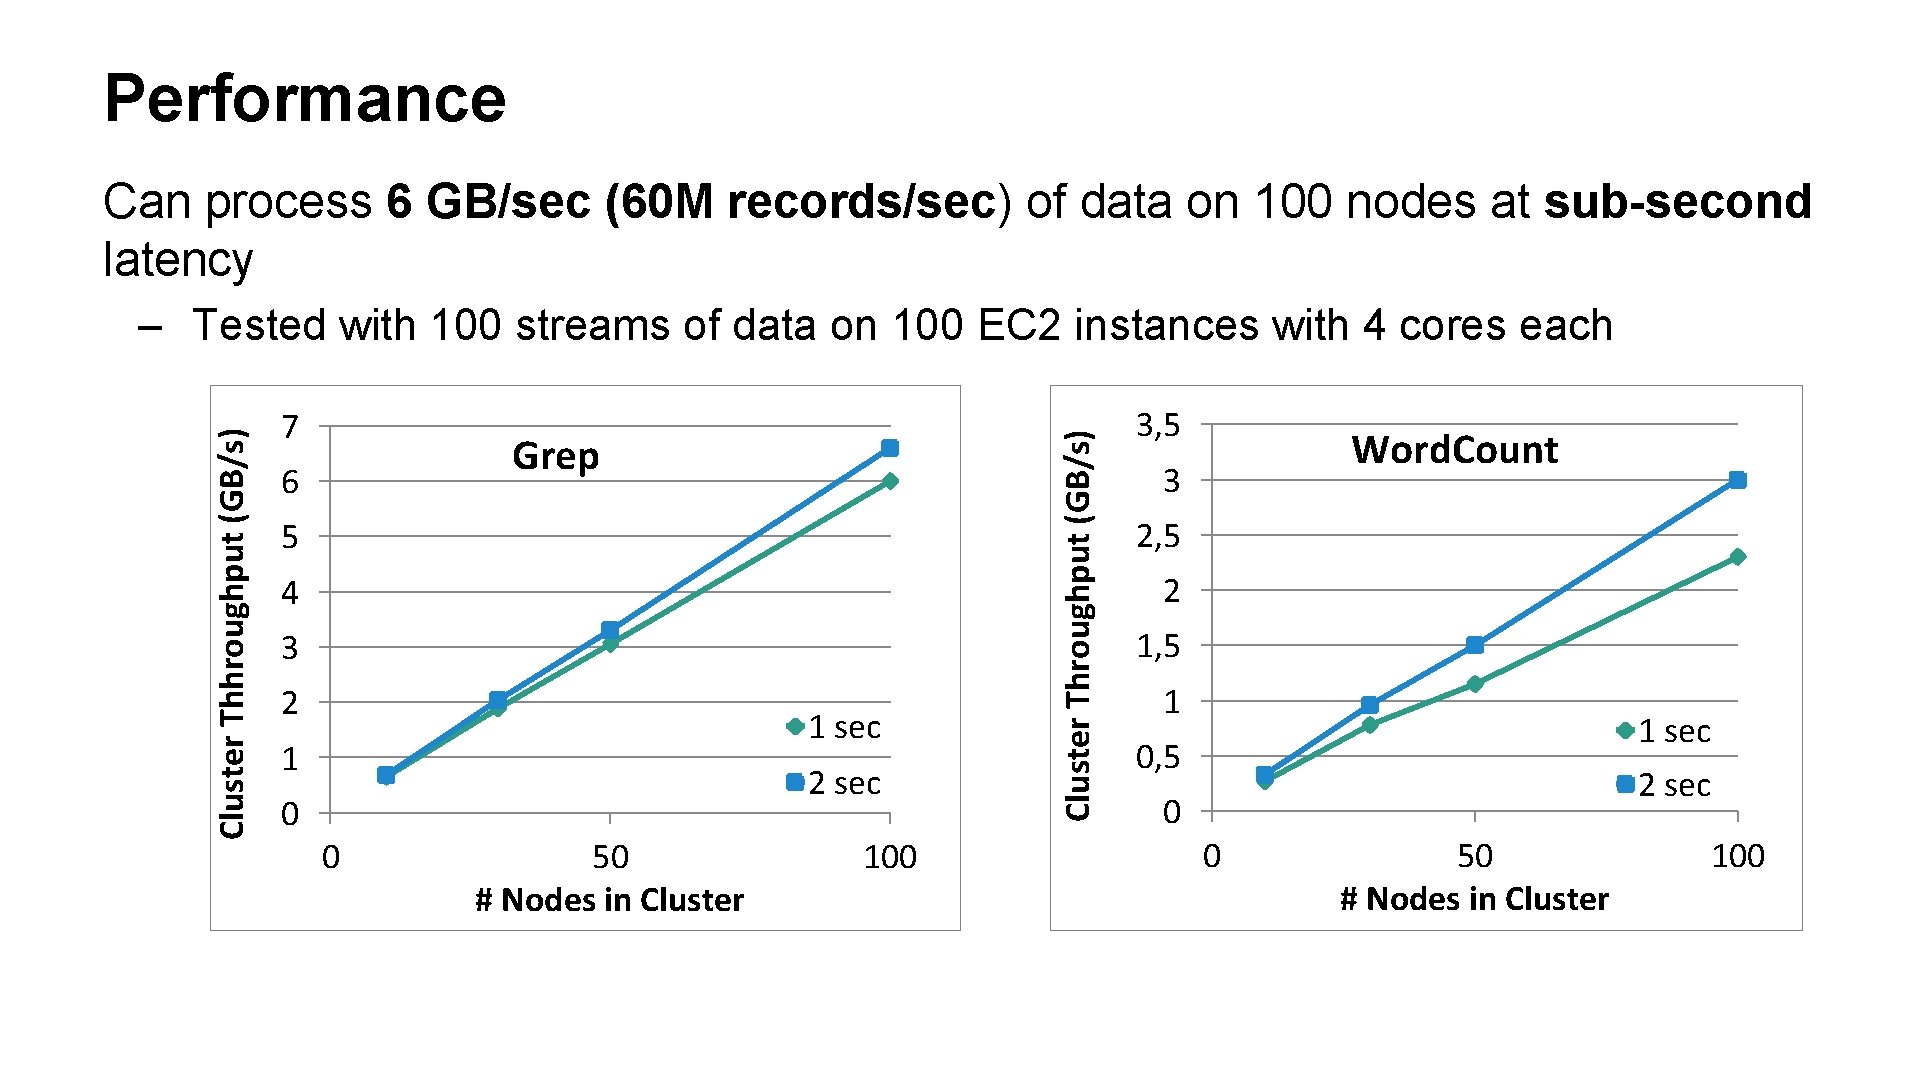 Performance Can process 6 GB/sec (60 M records/sec) of data on 100 nodes at